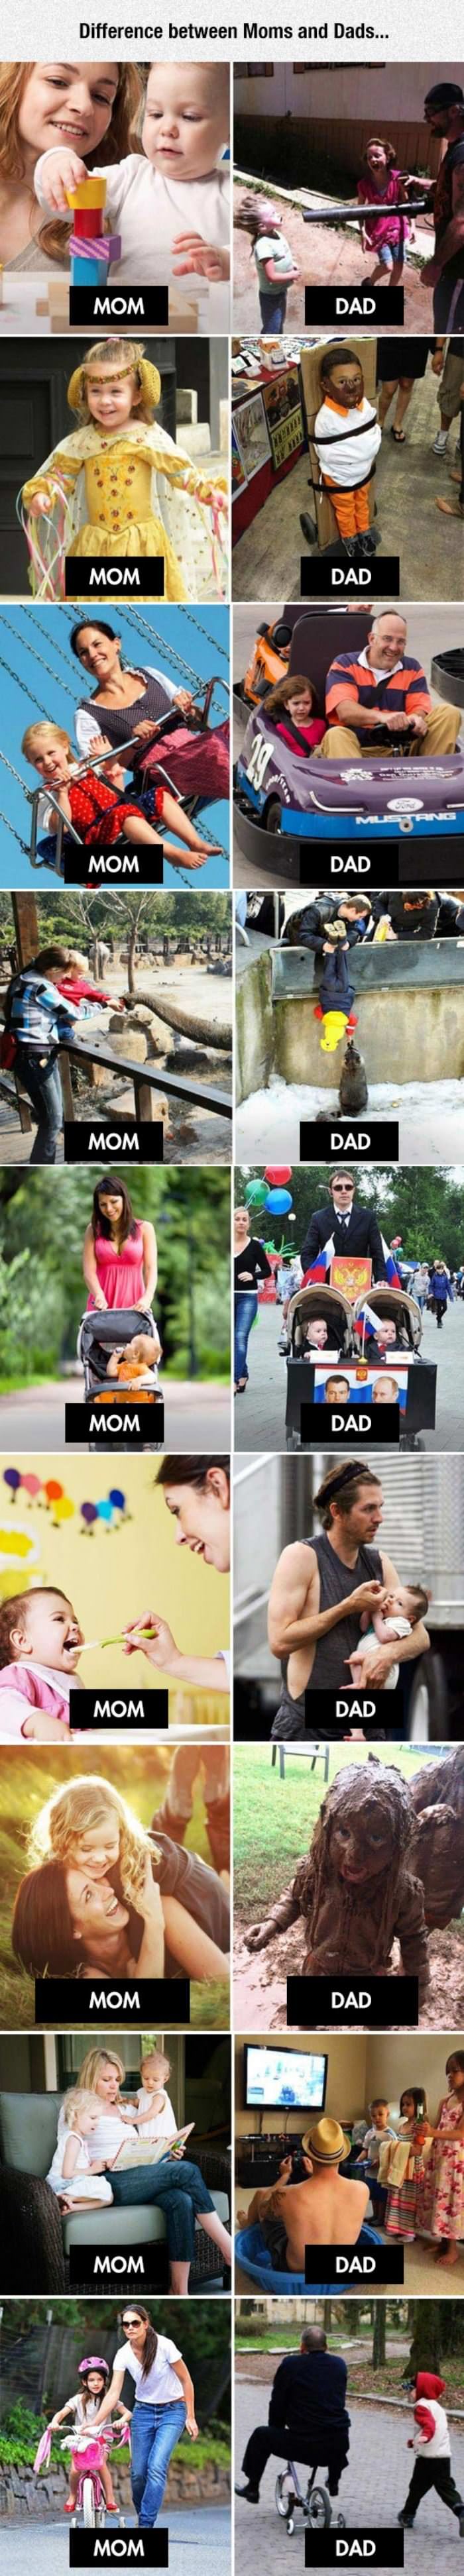 difference between moms and dads funny picture